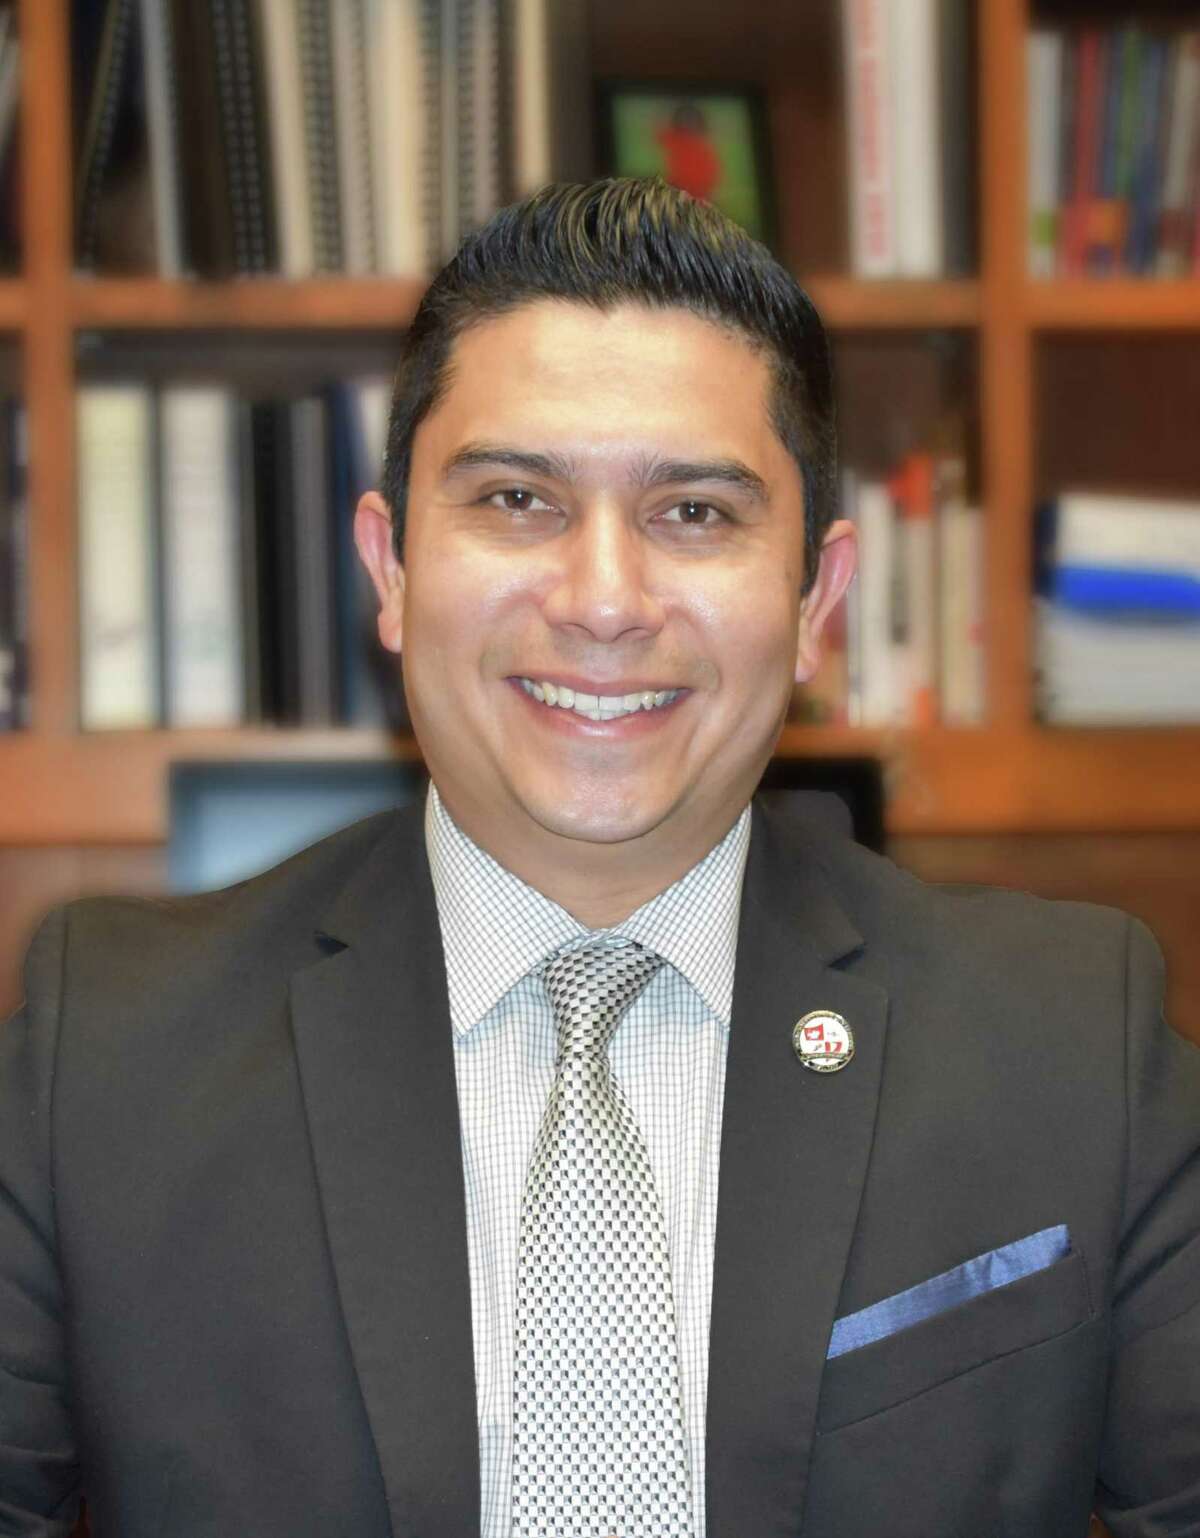 South San ISD superintendent Alexandro Flores said Texas’ education funding system means “something else suffers” when school districts pay for innovative programs or improved academic offerings.